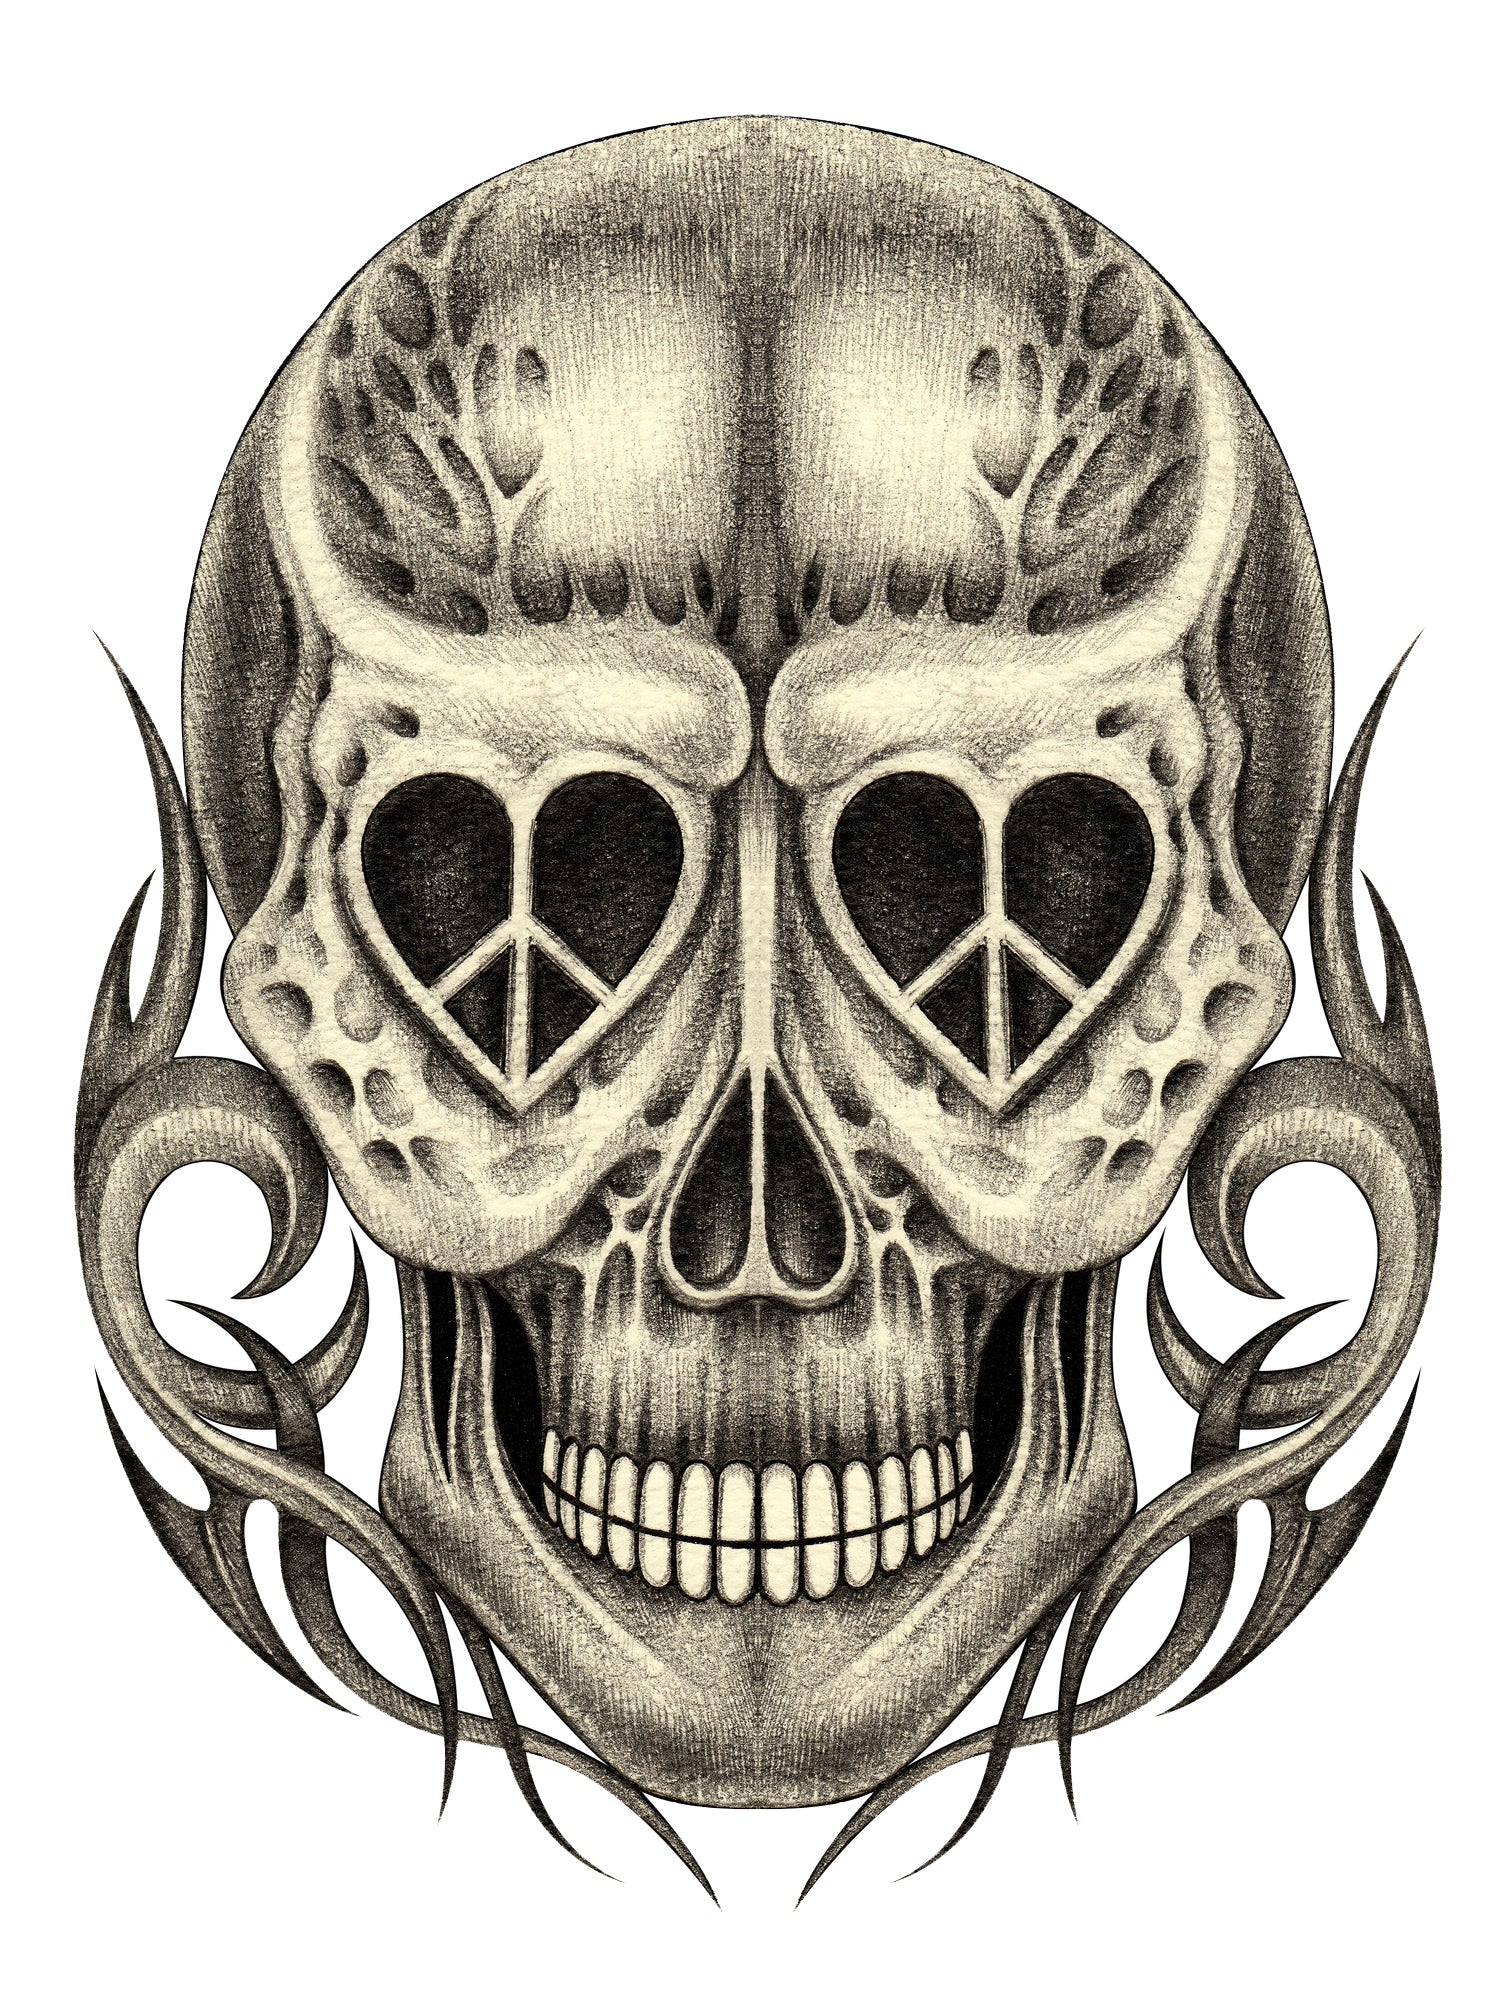 Pencil Sketch Skull with Peace Sign Heart Eyes Vinyl Decal Sticker